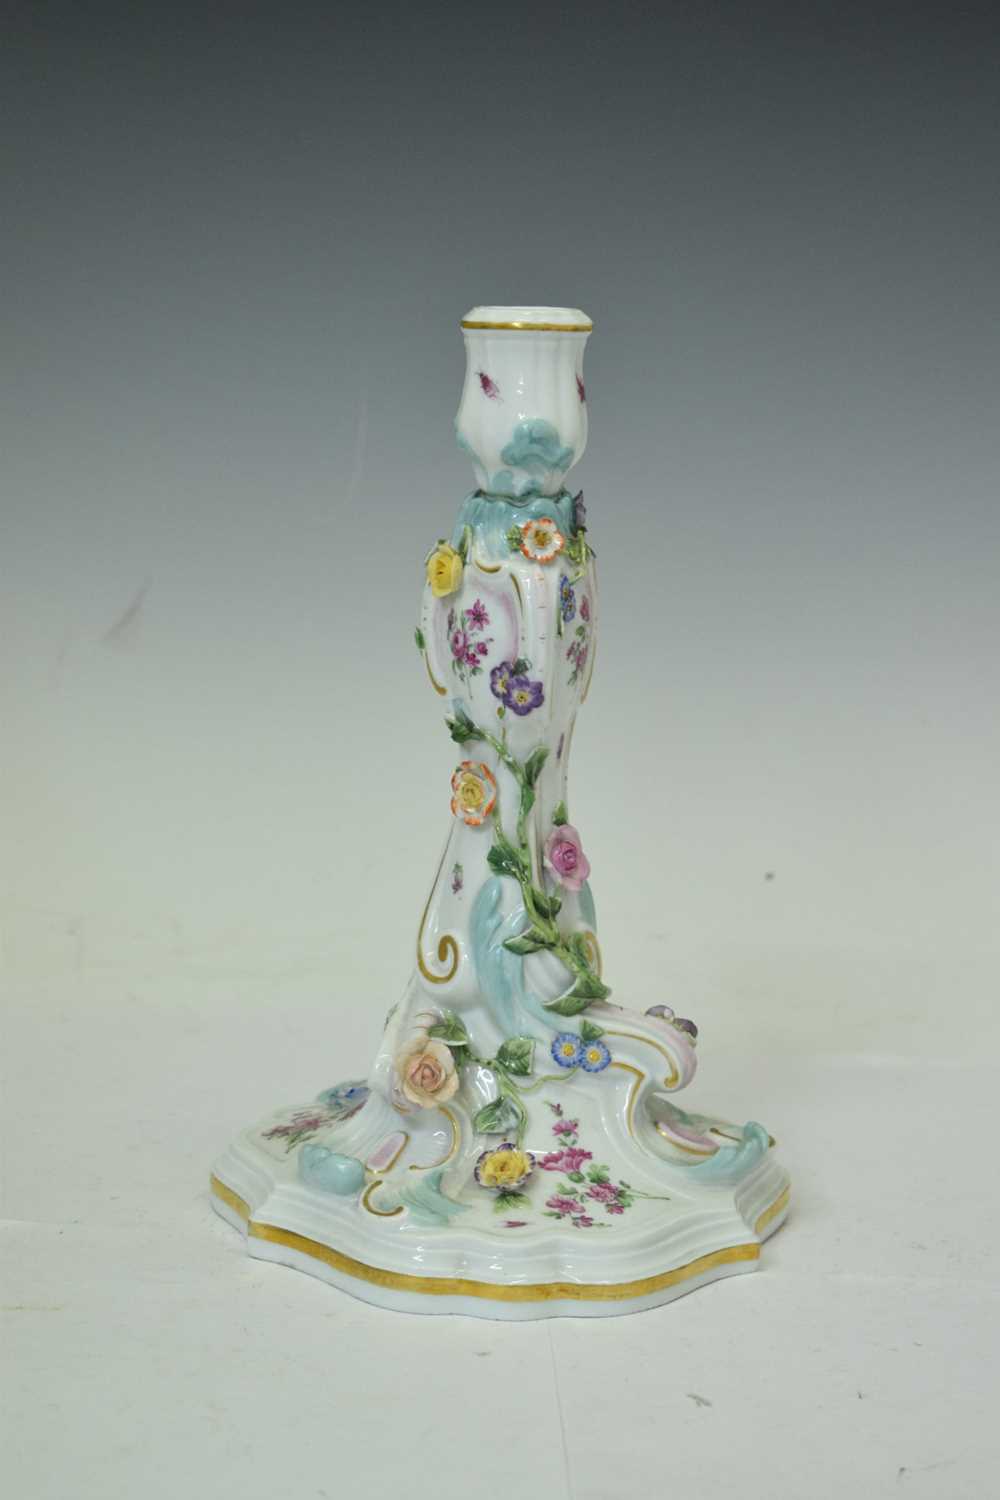 Late 19th/early 20th century Meissen porcelain candlestick - Image 2 of 9